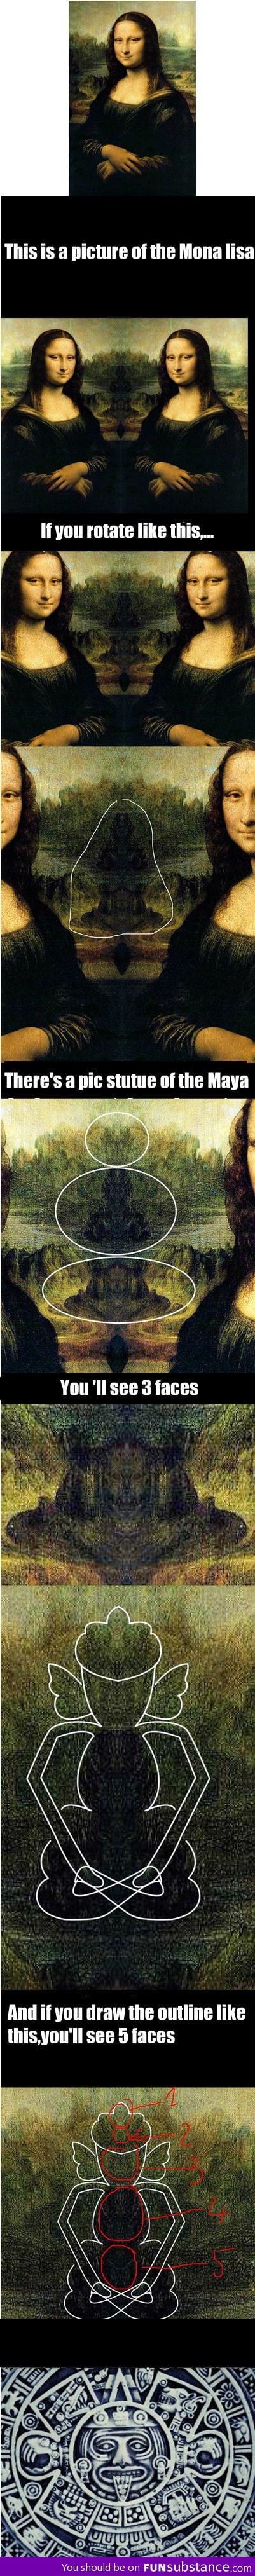 Facts about the Mona Lisa painting